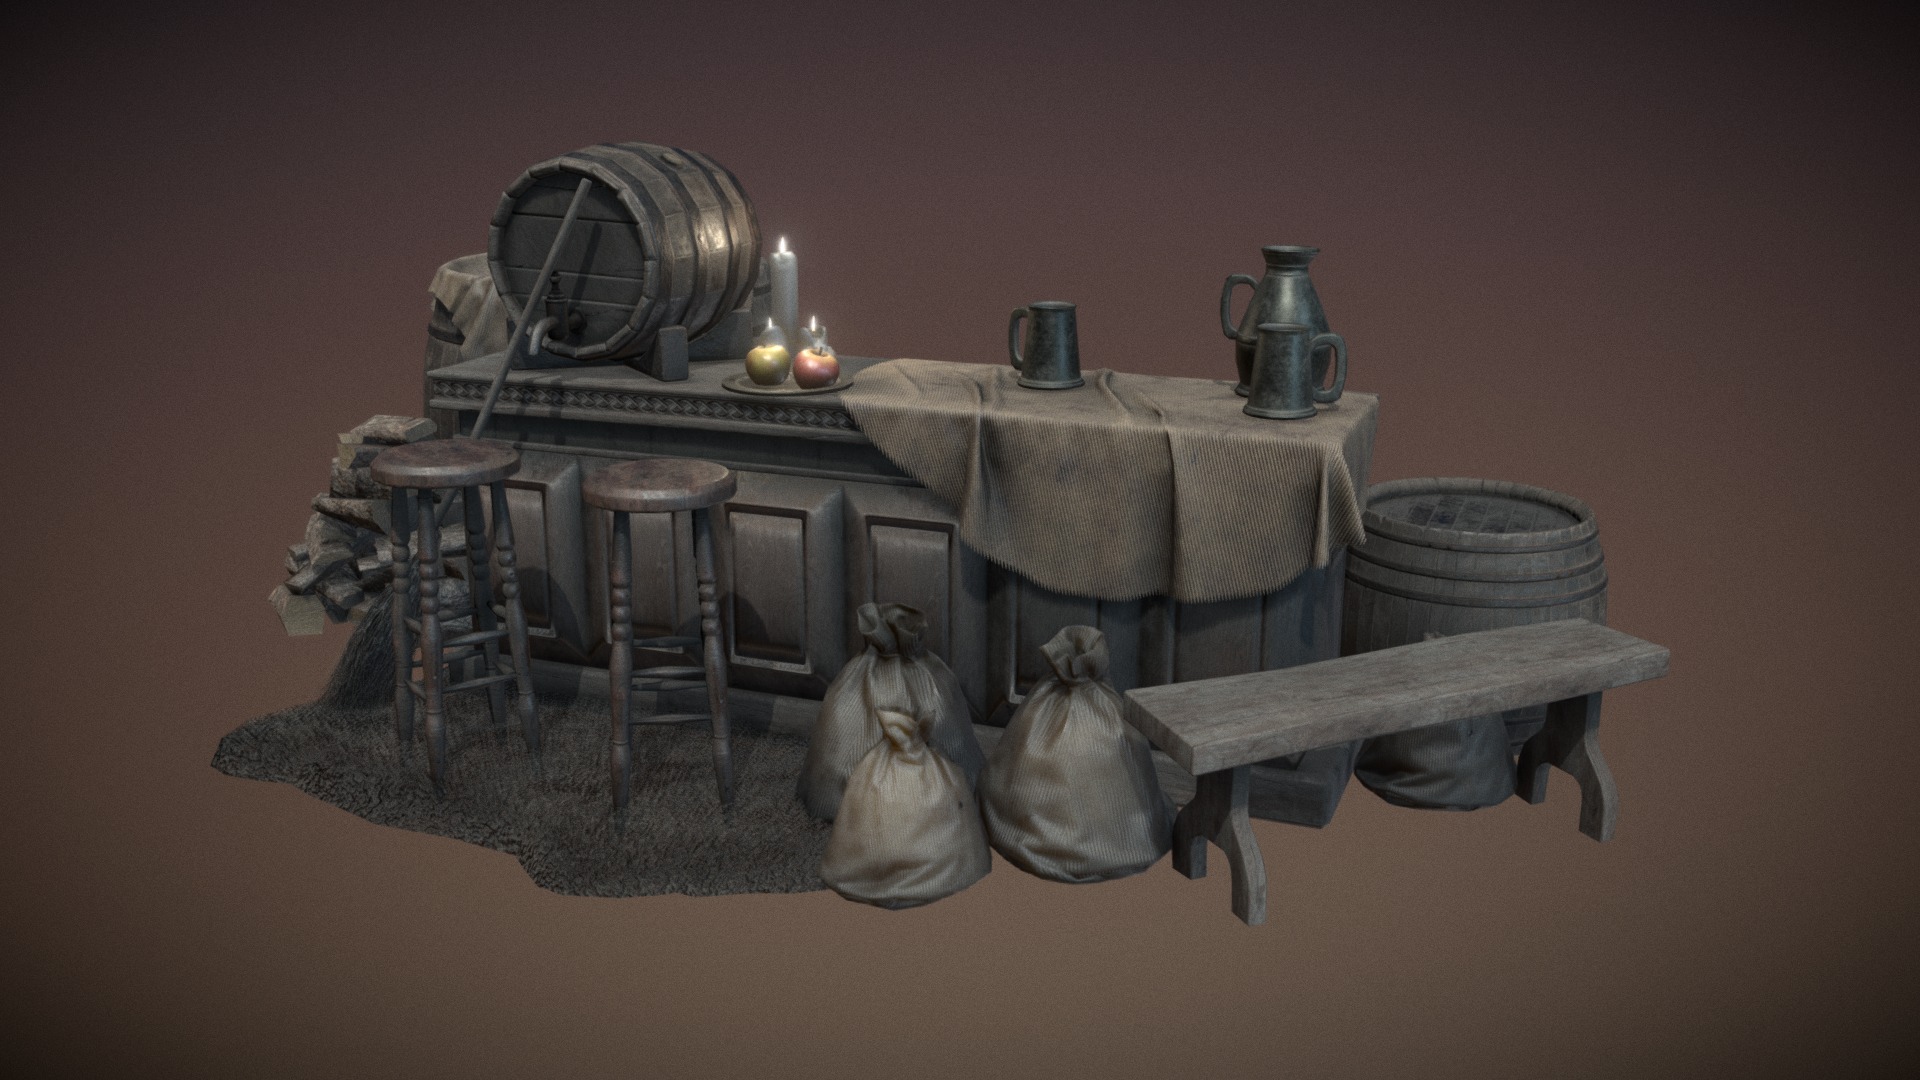 3D model Old Tavern Bundle 1 (of 2) - This is a 3D model of the Old Tavern Bundle 1 (of 2). The 3D model is about a table with a cloth and a table with objects on it.